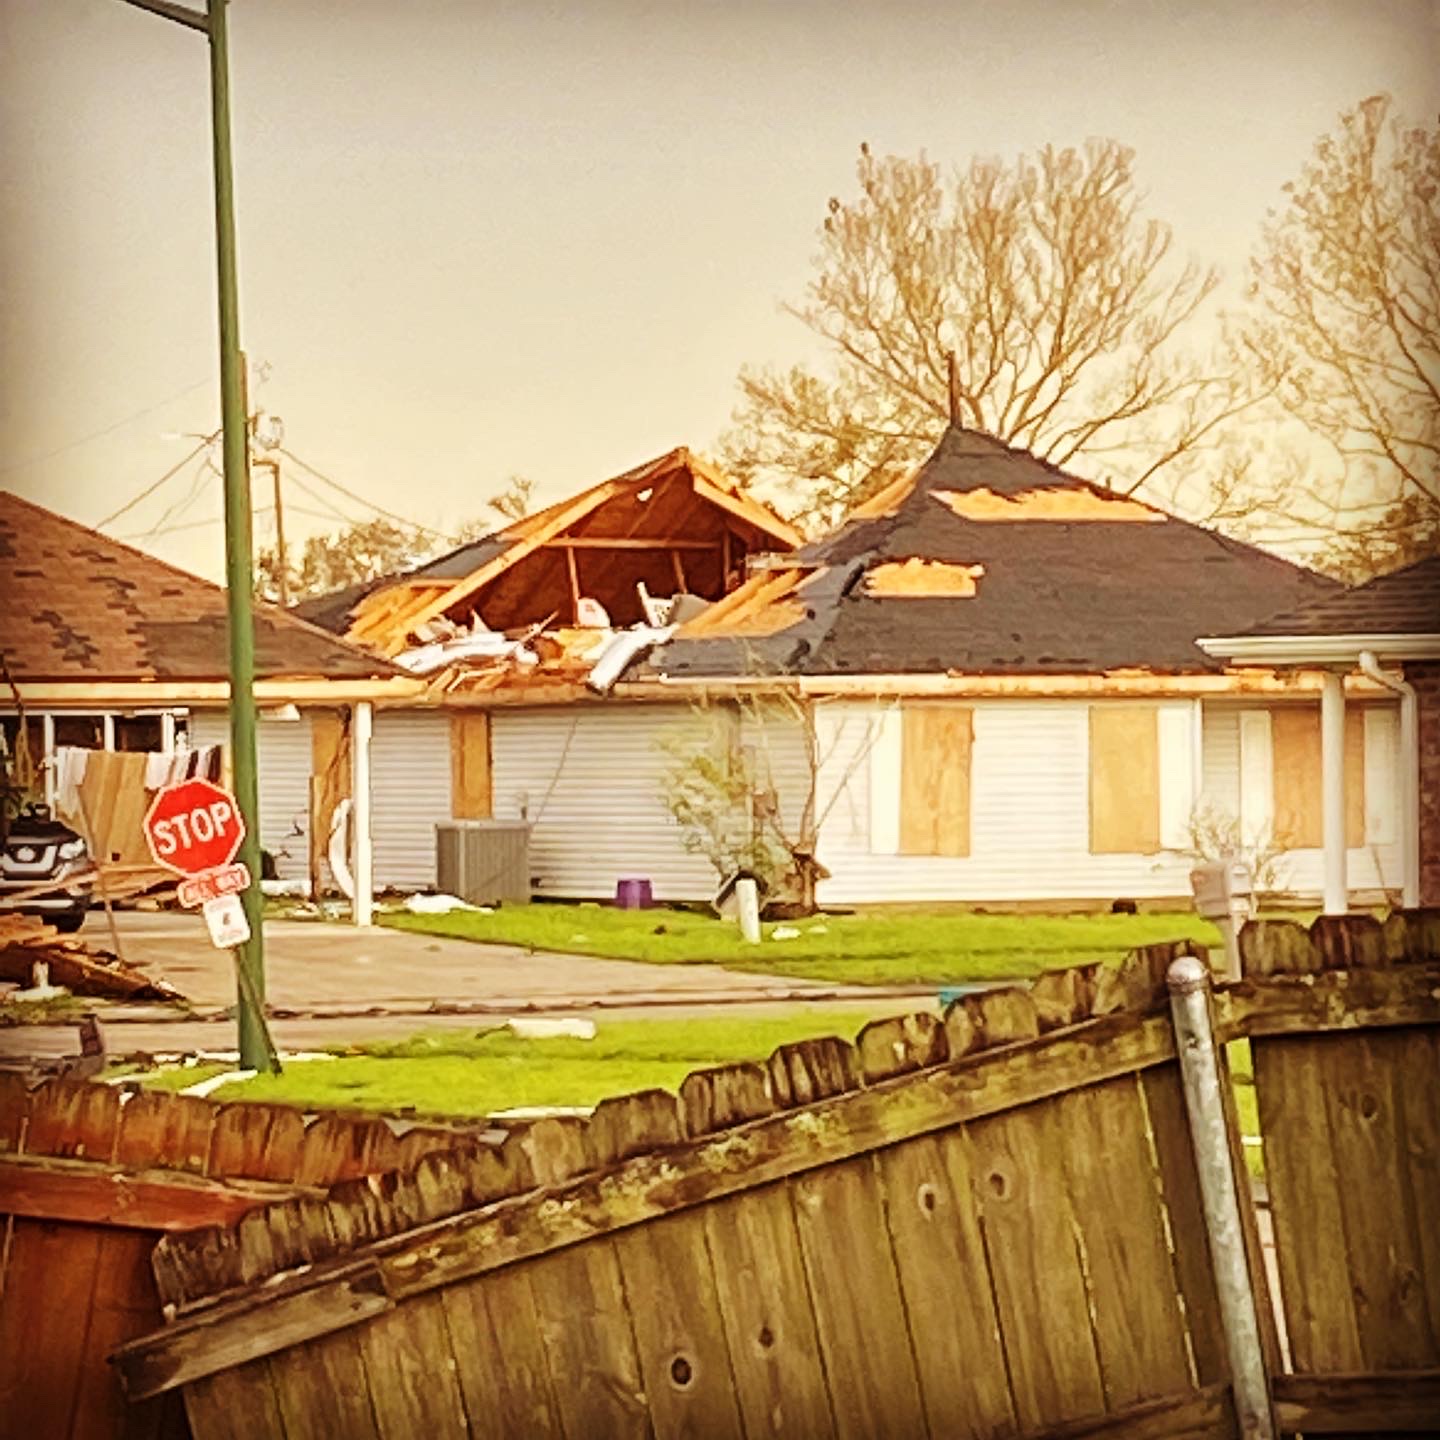 House in Houma with severely damaged roof